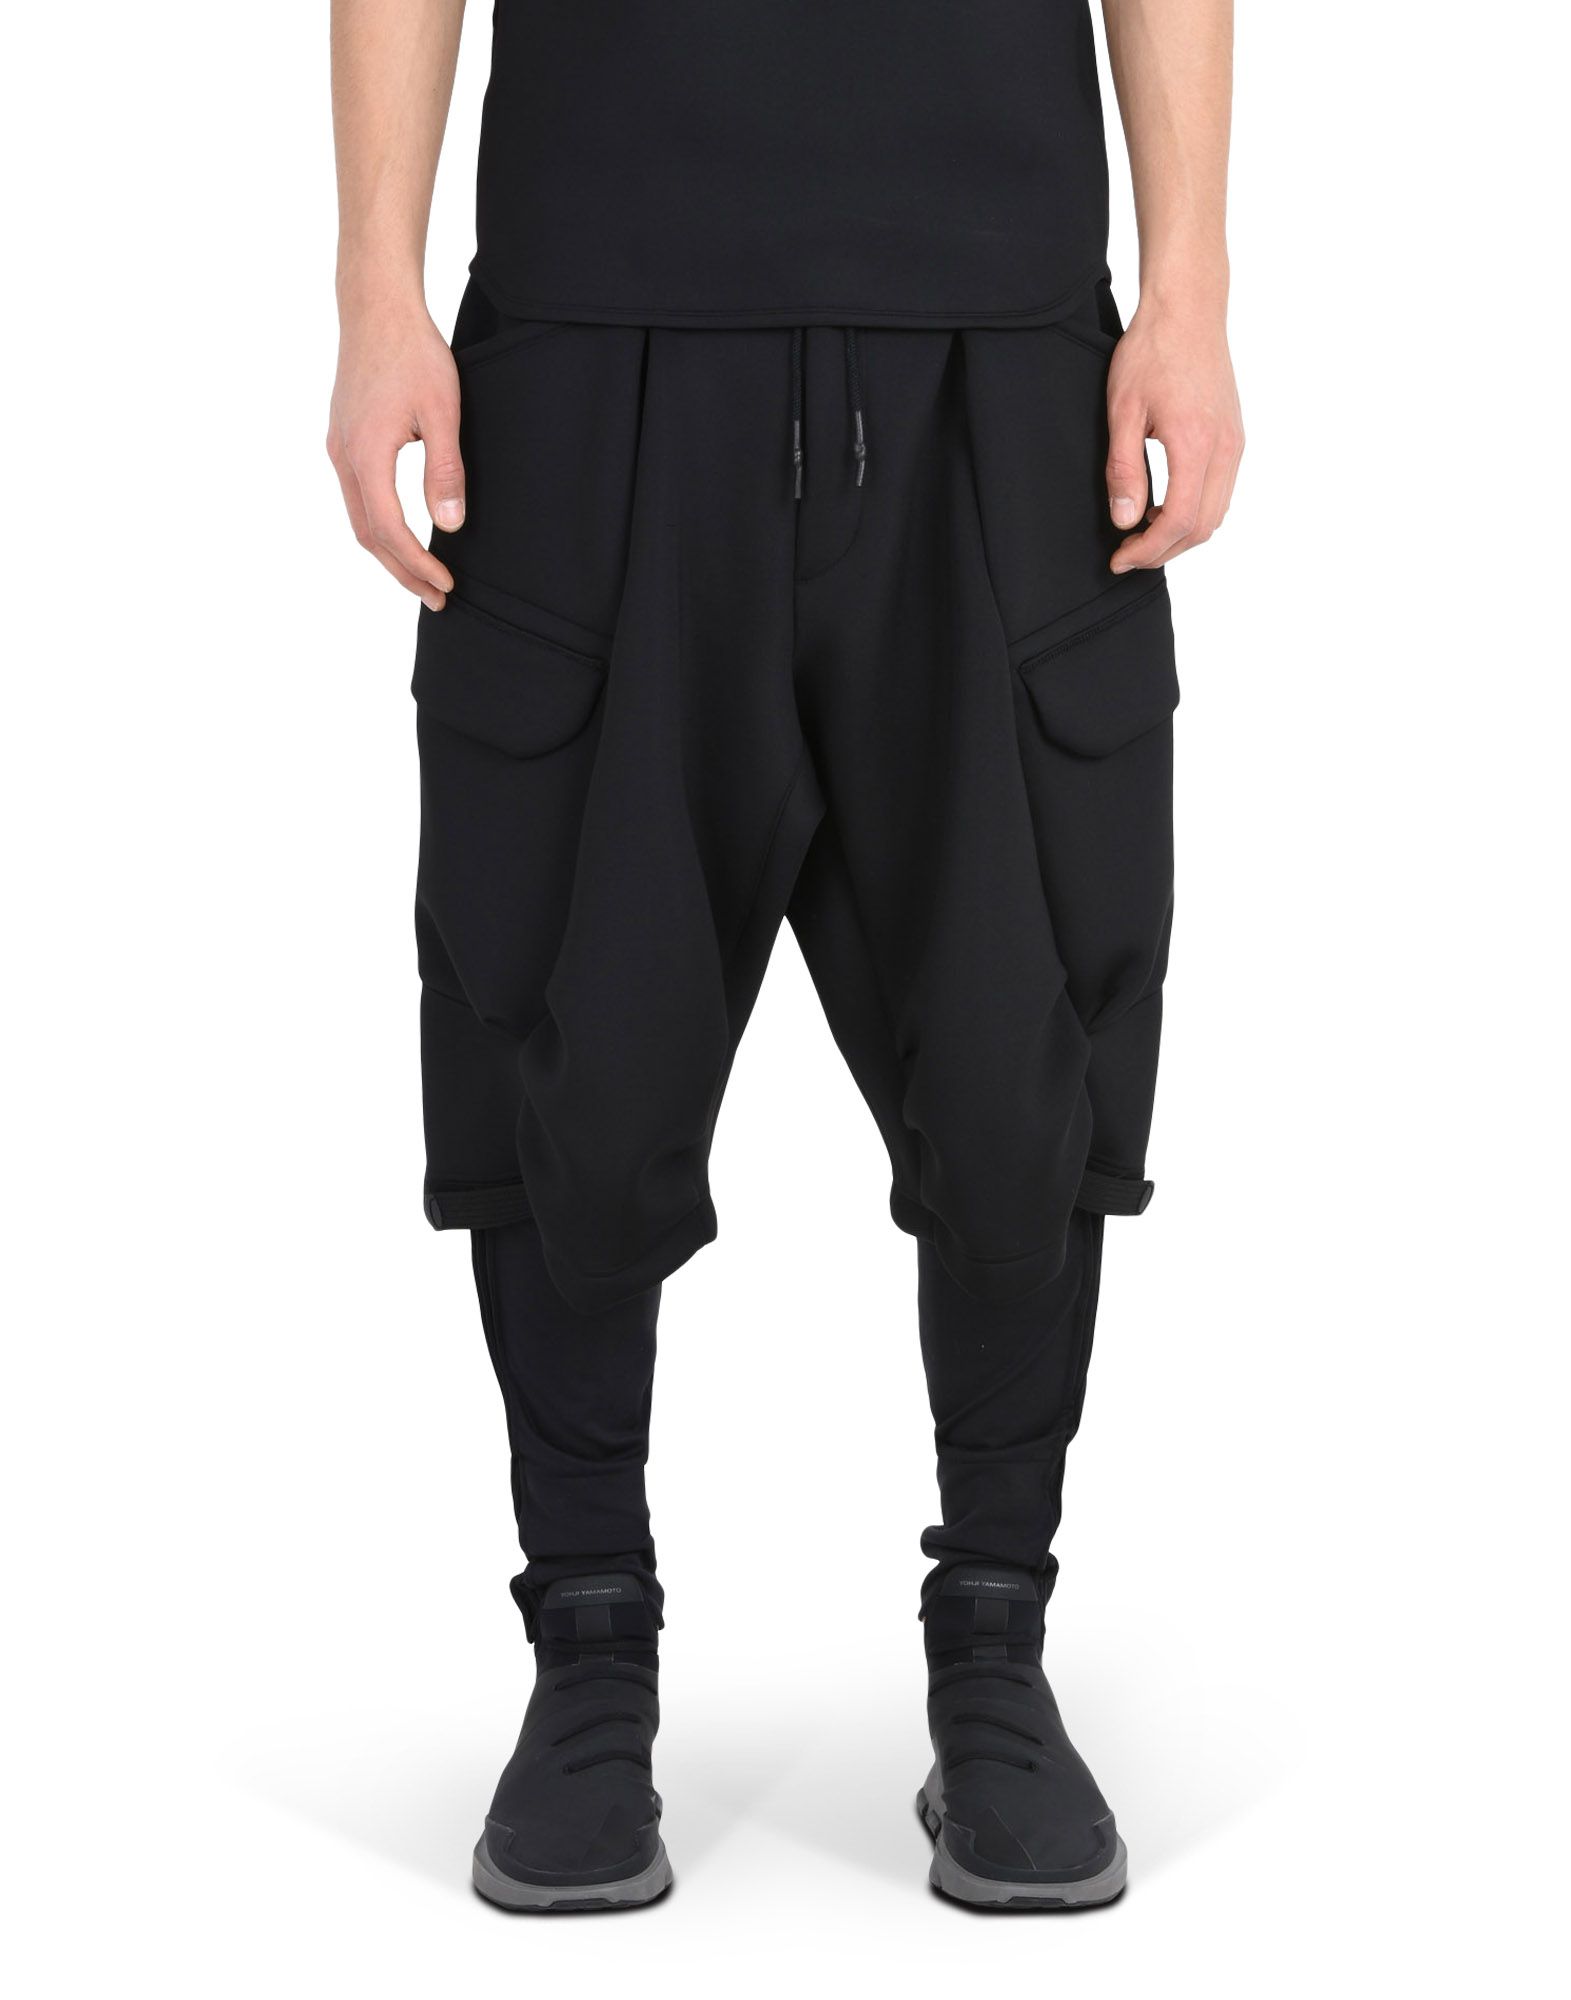 Y 3 FUTURE SPORT SHORTS for Men | Adidas Y-3 Official Store